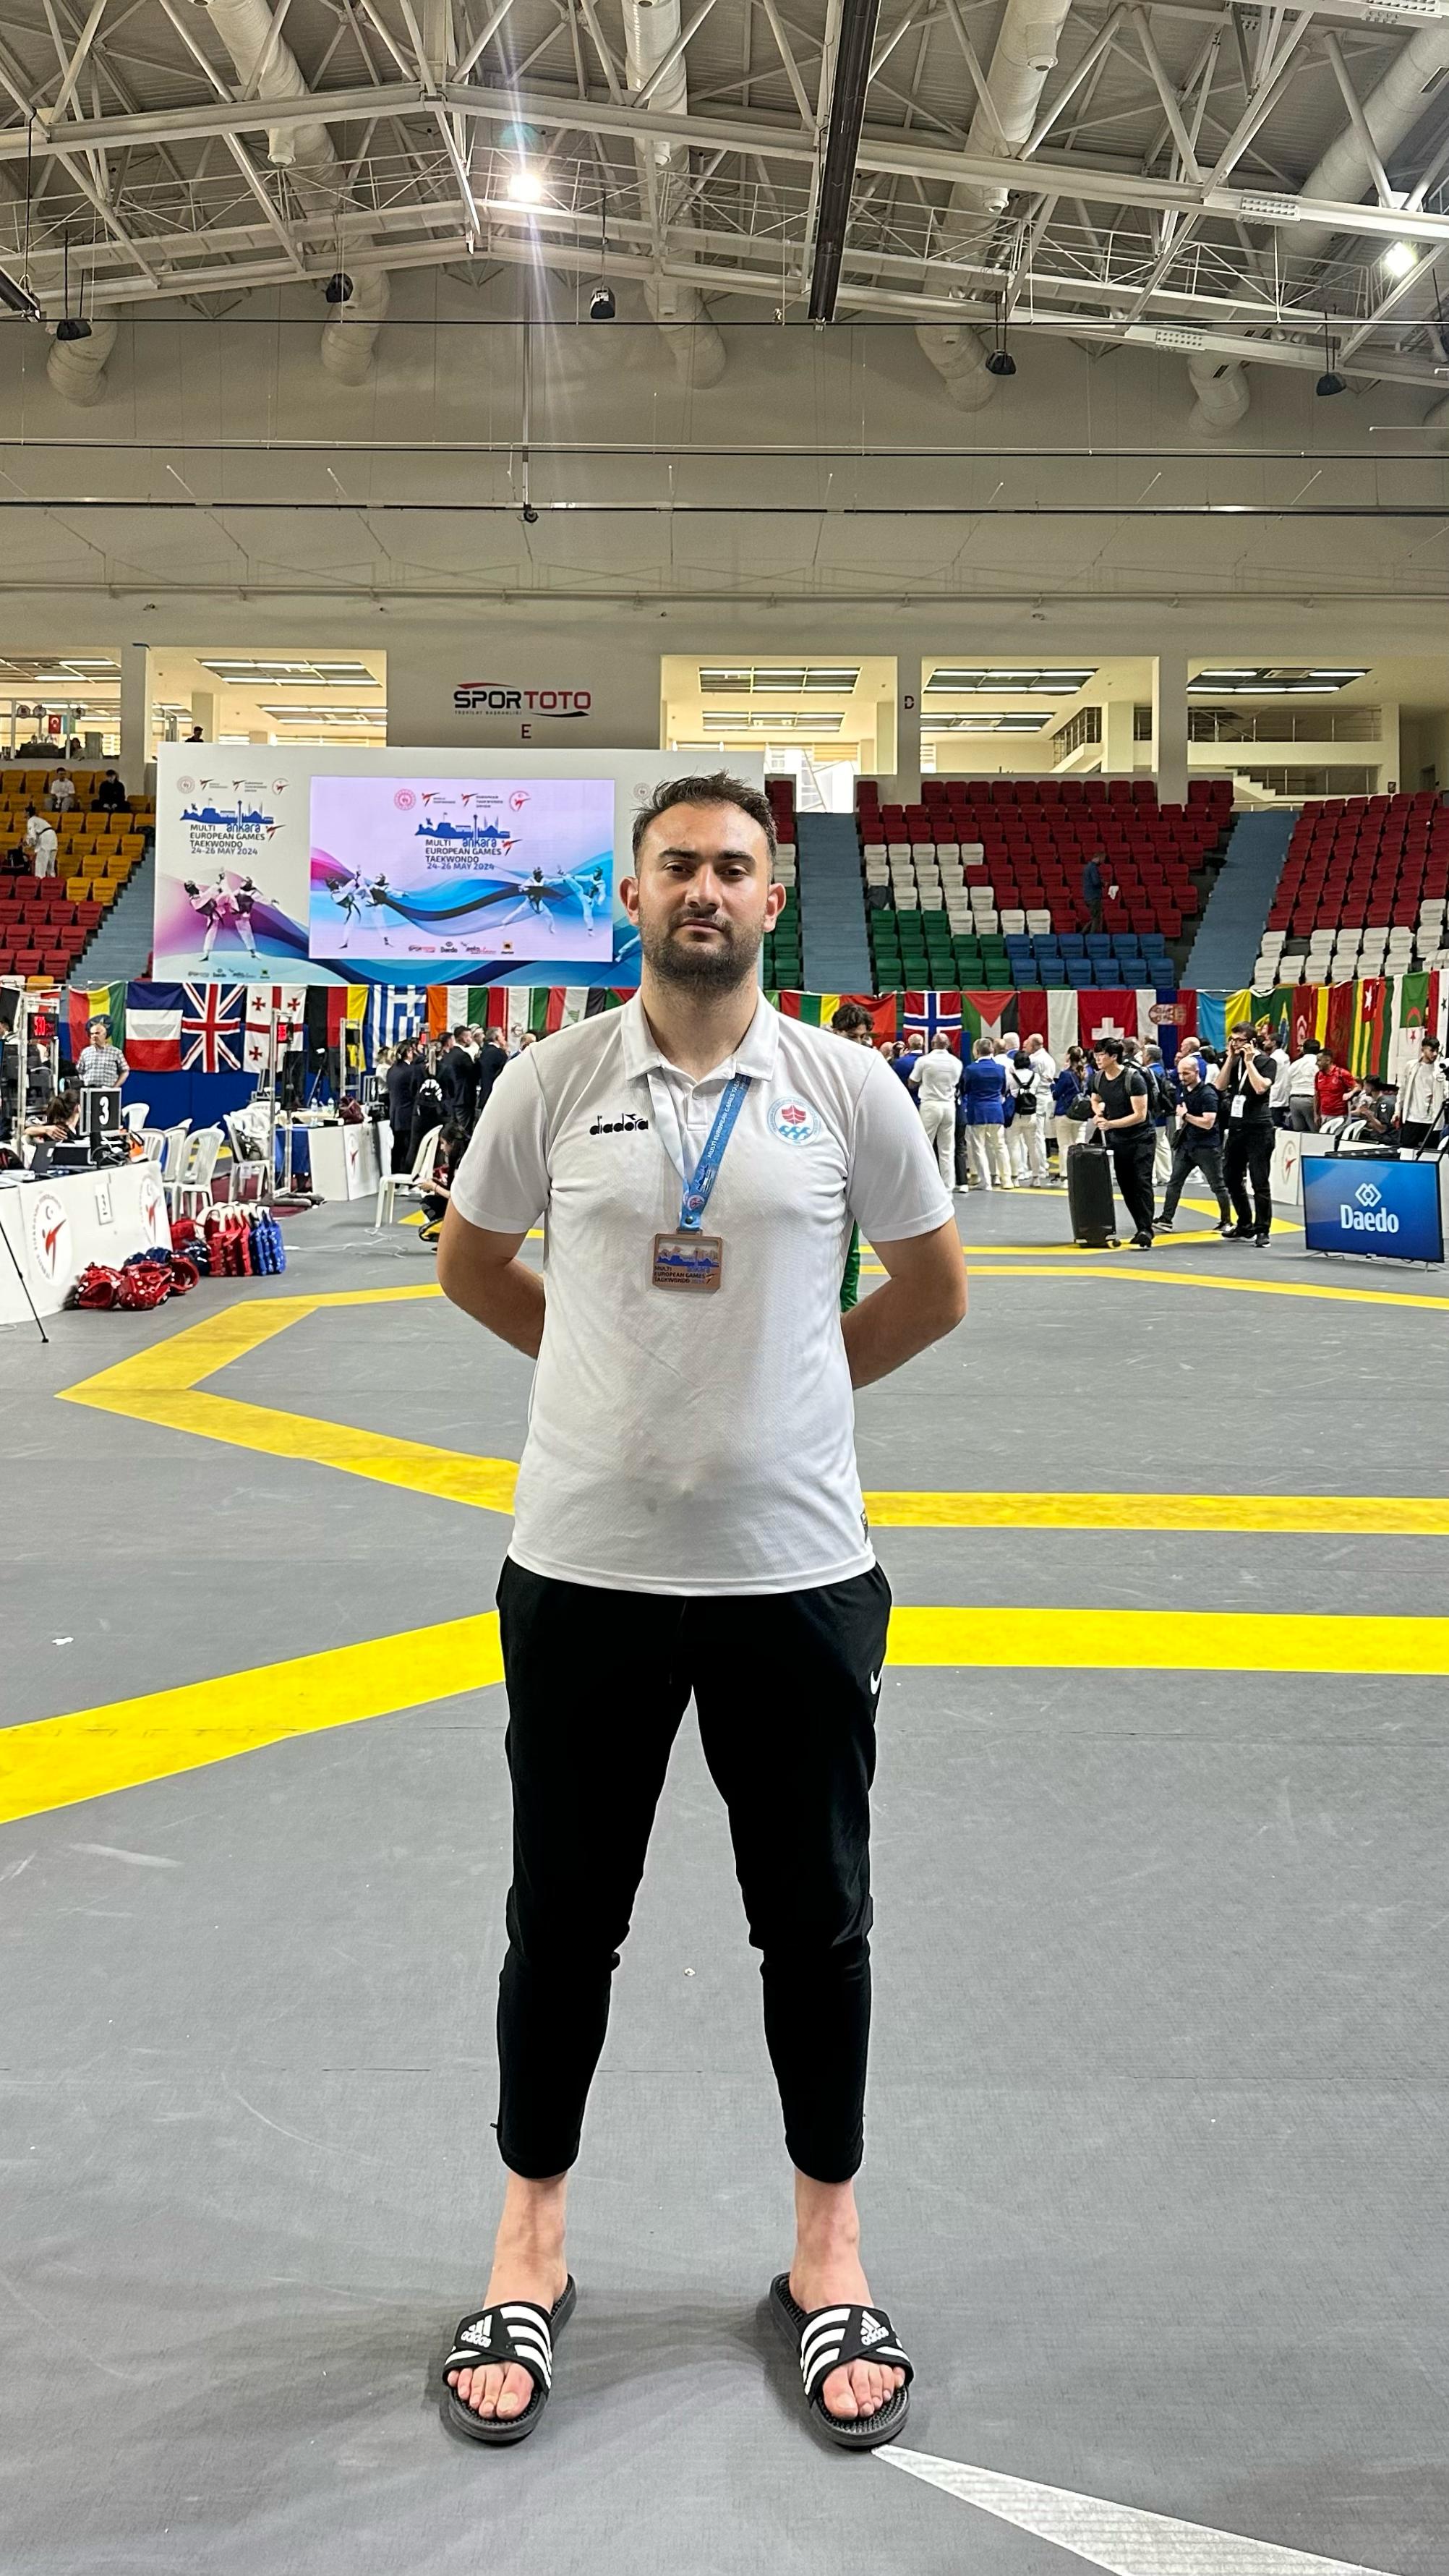 We entered the medal list of the European Multiple Taekwondo Games with Bronze Medal